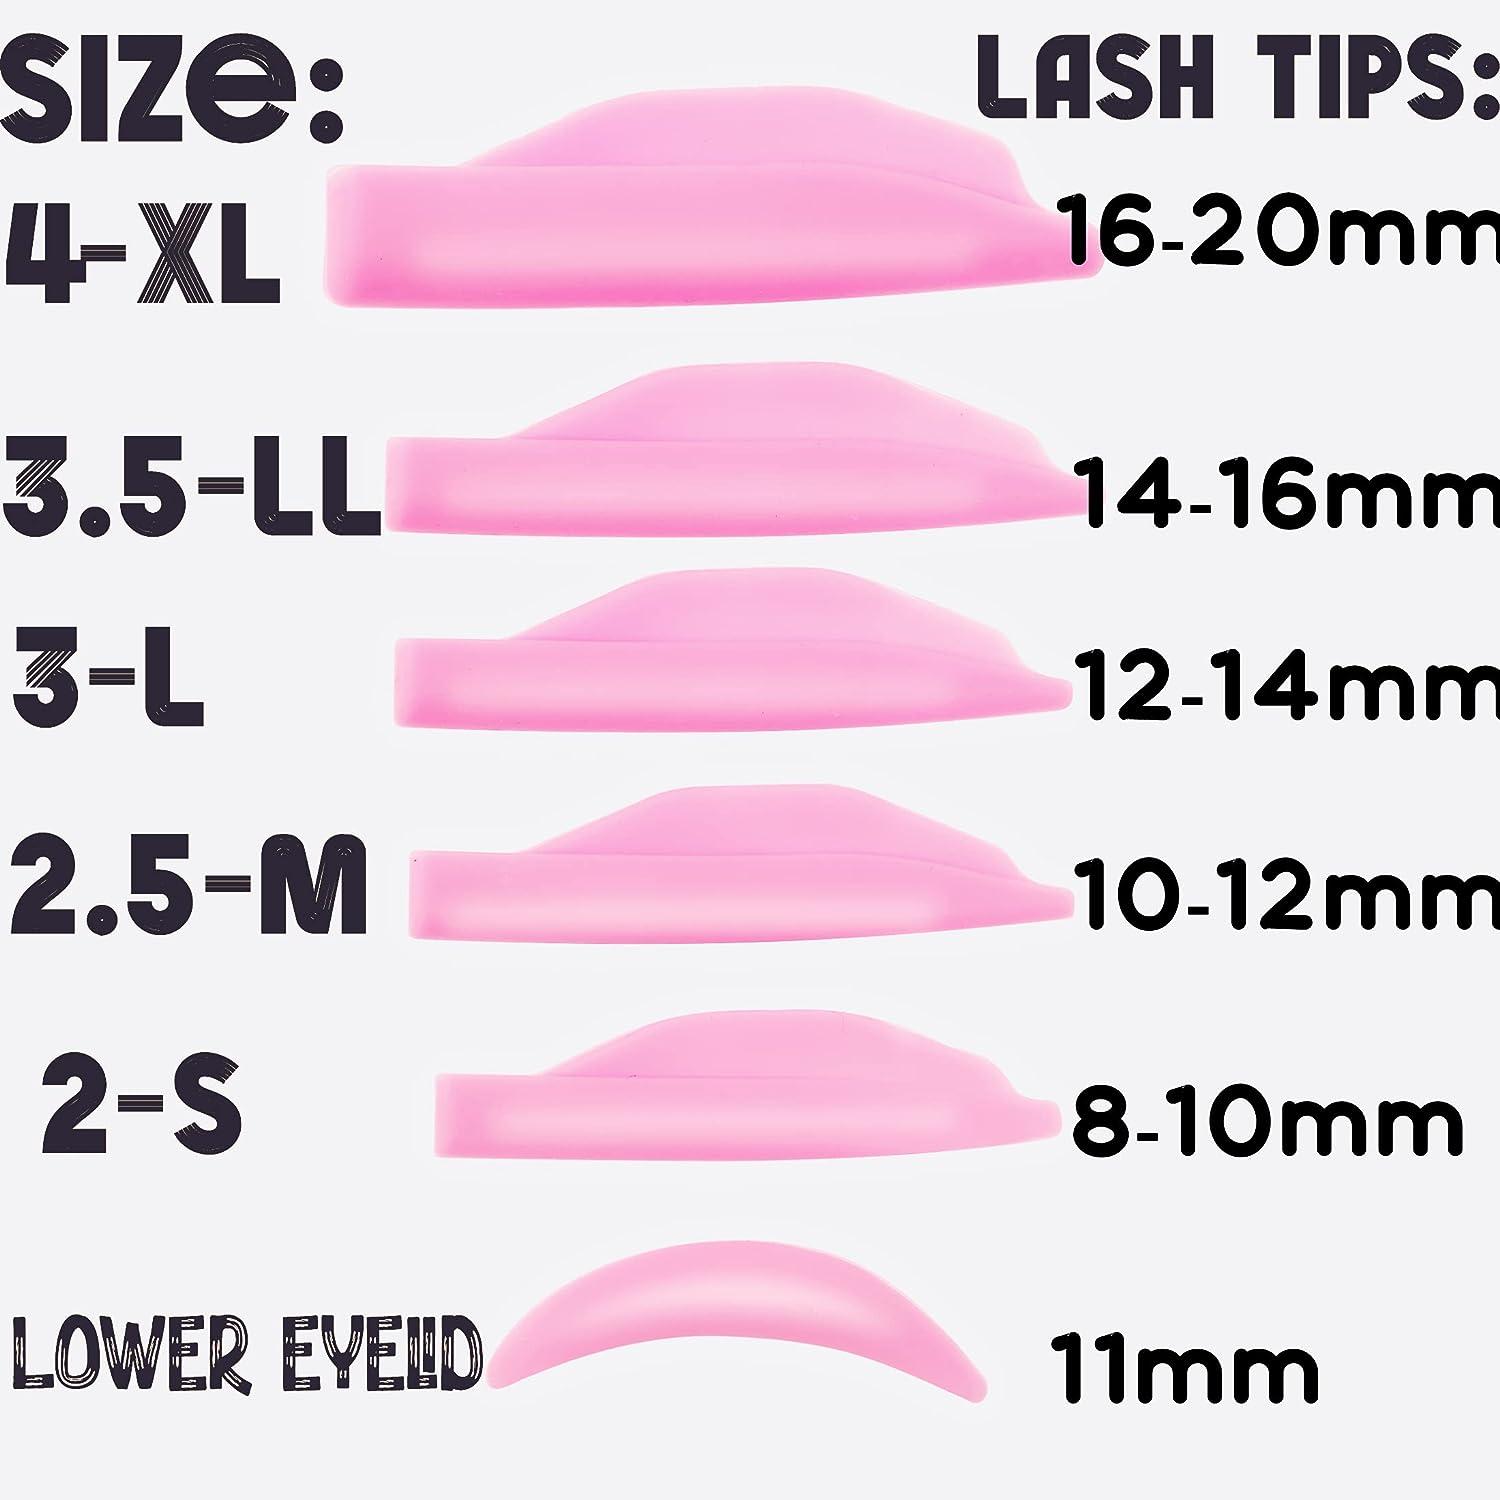  Lash Lift Pad Shield, Ultra Curl Eyelash Pads, Mega L Shape  Perm Rod Roller With 6 Size, Silicone Guard Lifting Eyelashes Up Rapidly,  DIY Perming At Home Dolphin Rods Stay